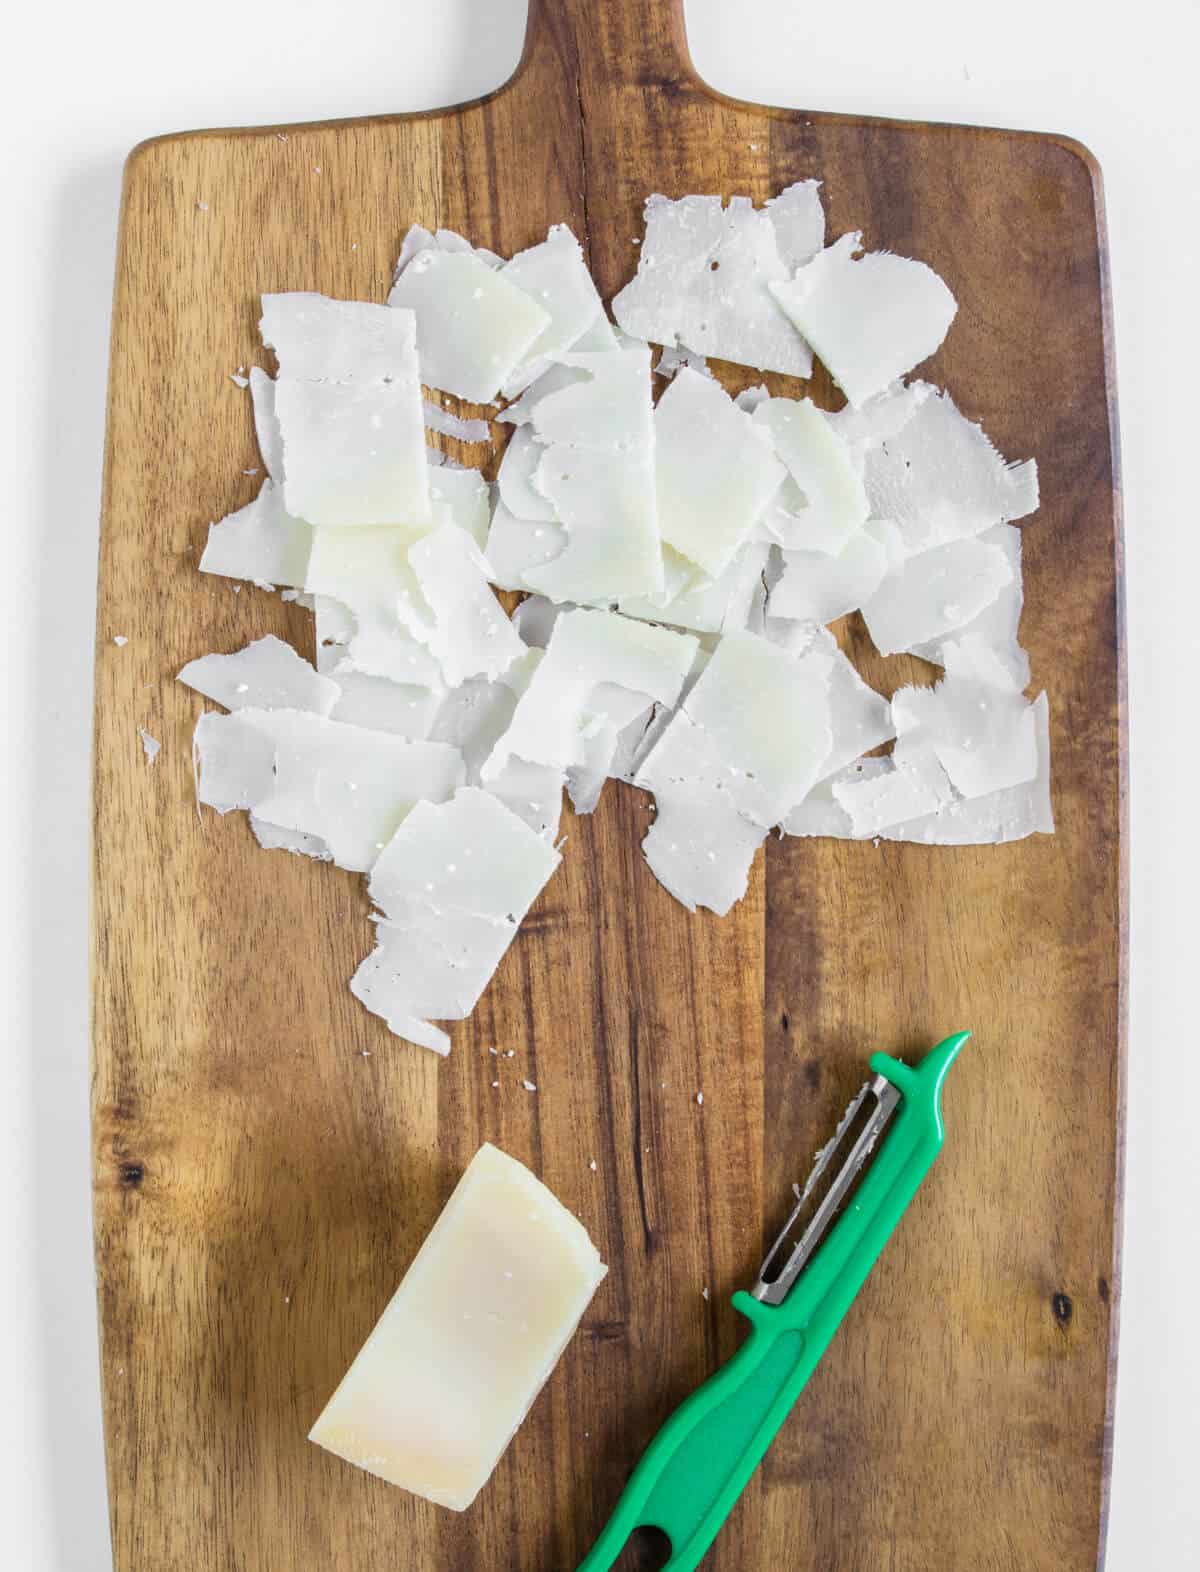 Grated parmesan cheese with a peeler on a chopping board  